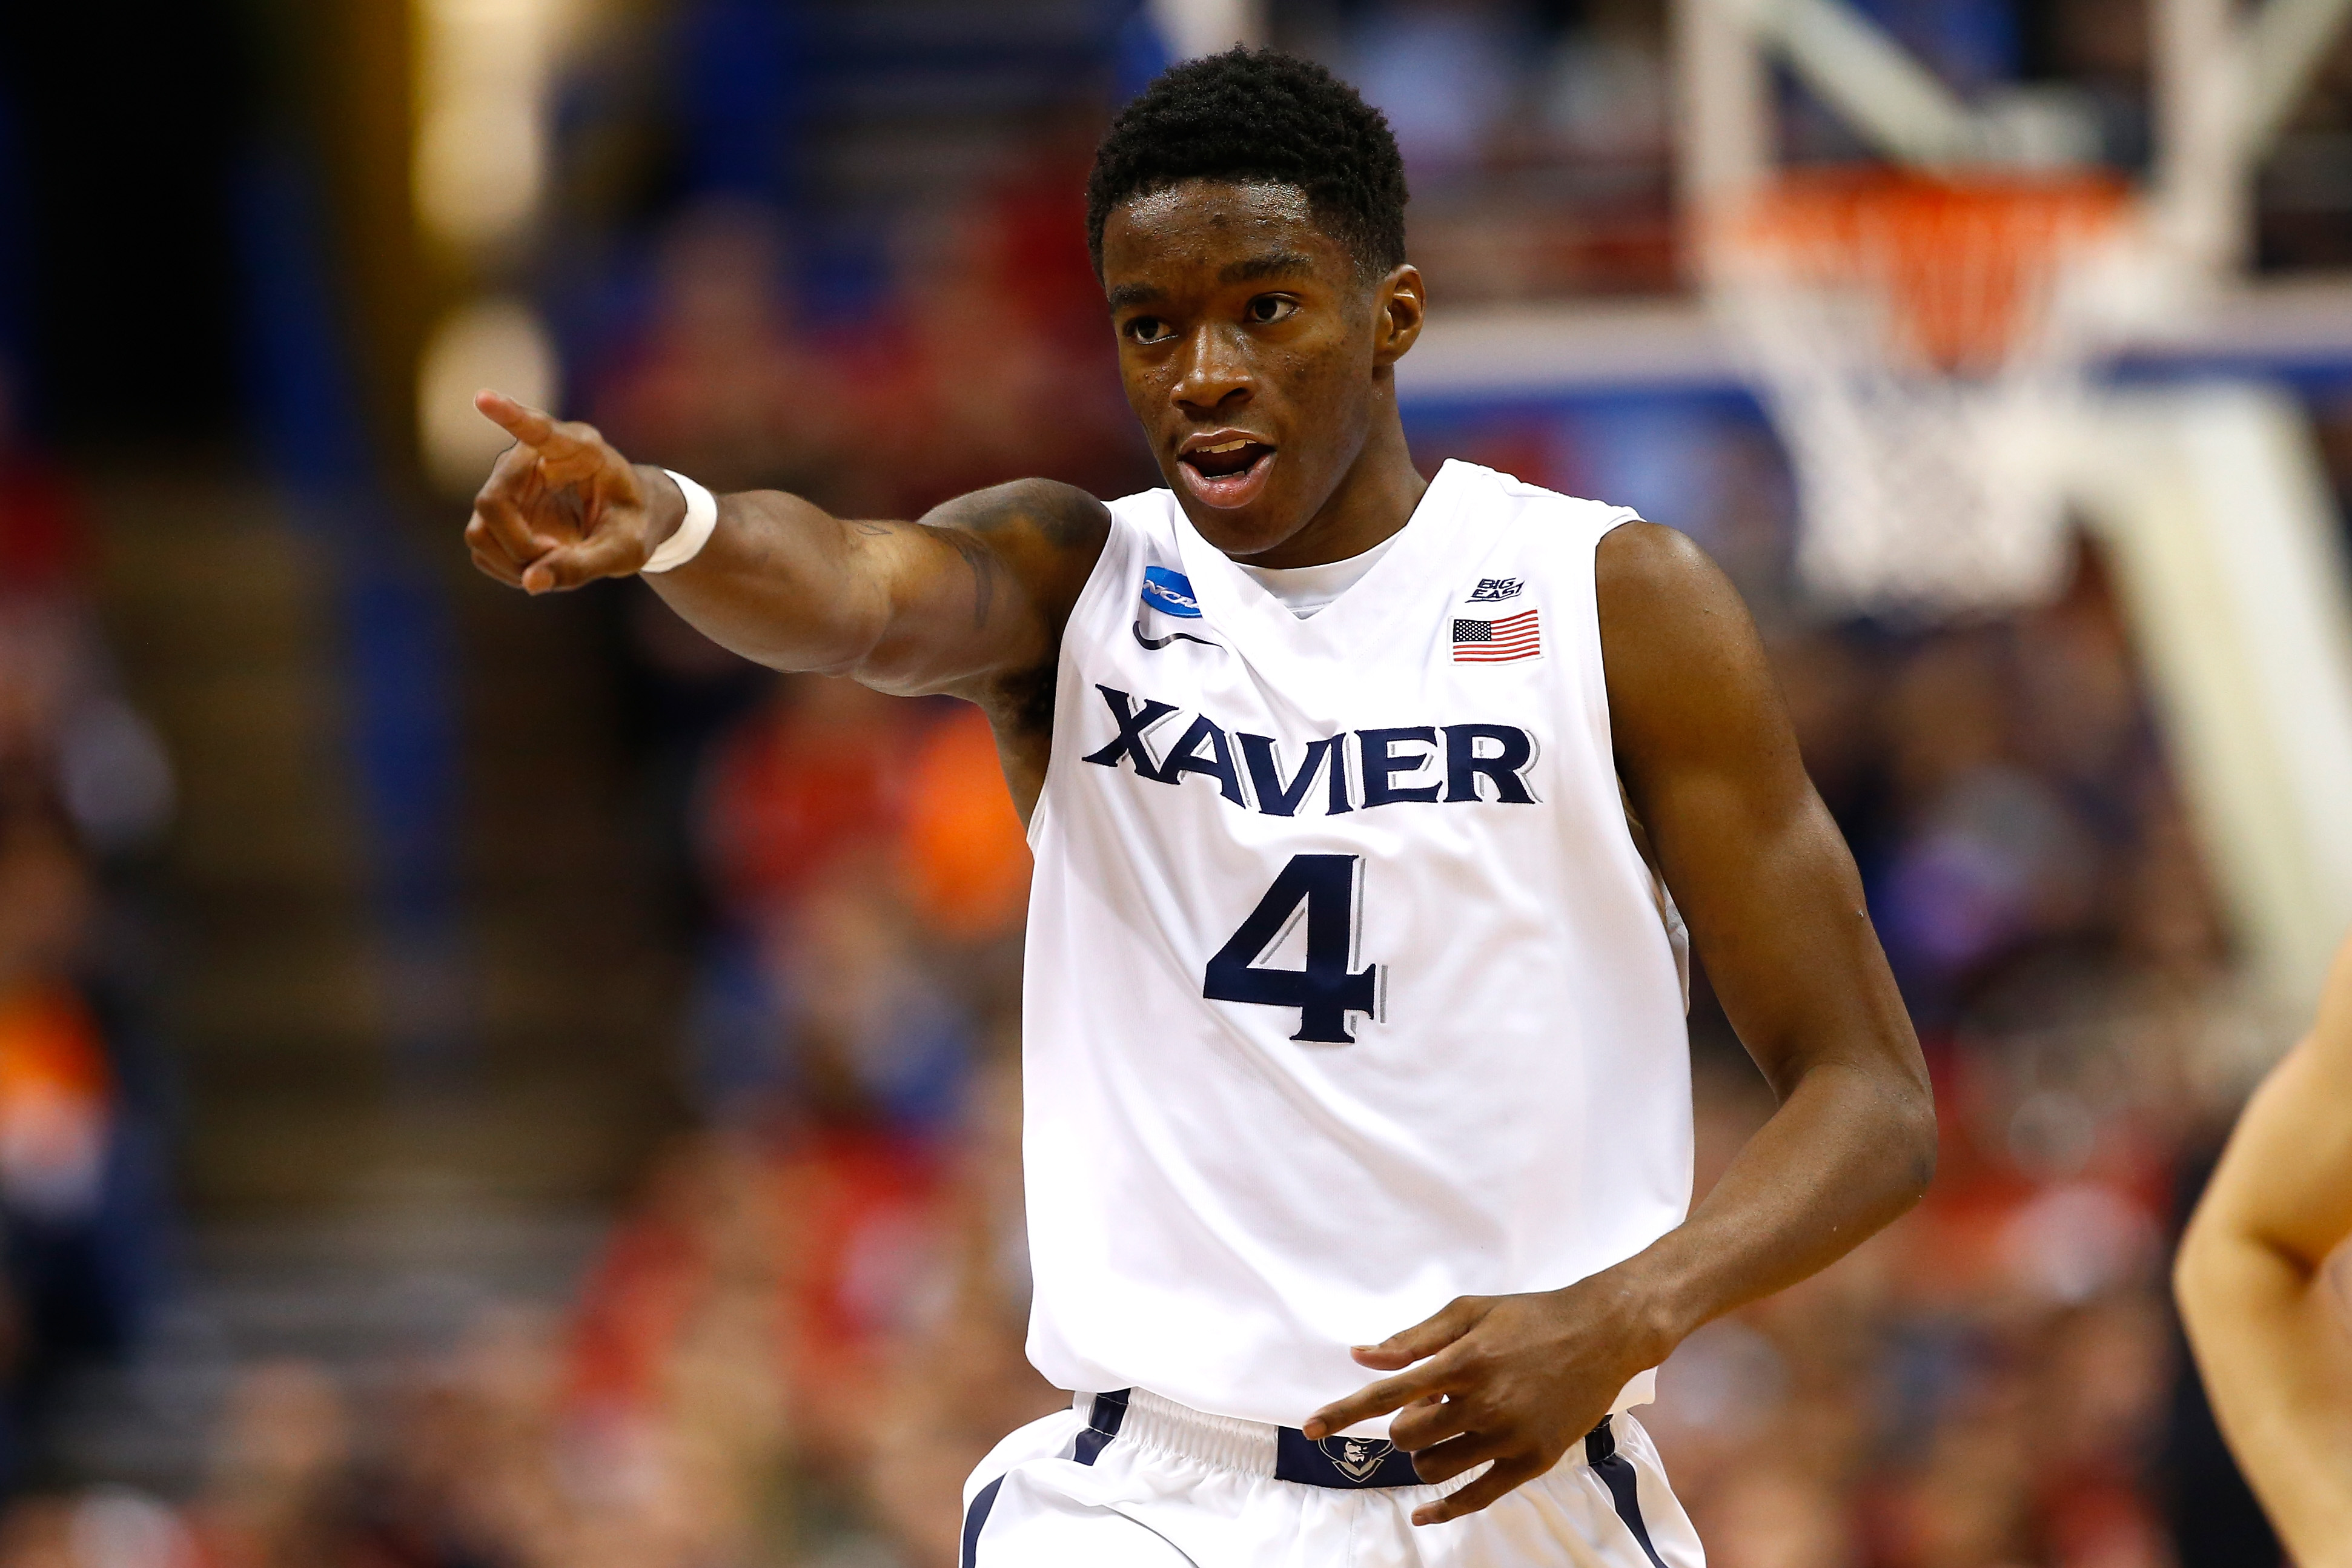 ST LOUIS, MO - MARCH 20: Edmond Sumner #4 of the Xavier Musketeers reacts after a play in the first half against the Wisconsin Badgers during the second round of the 2016 NCAA Men's Basketball Tournament at Scottrade Center on March 20, 2016 in St Louis, Missouri. (Photo by Jamie Squire/Getty Images)